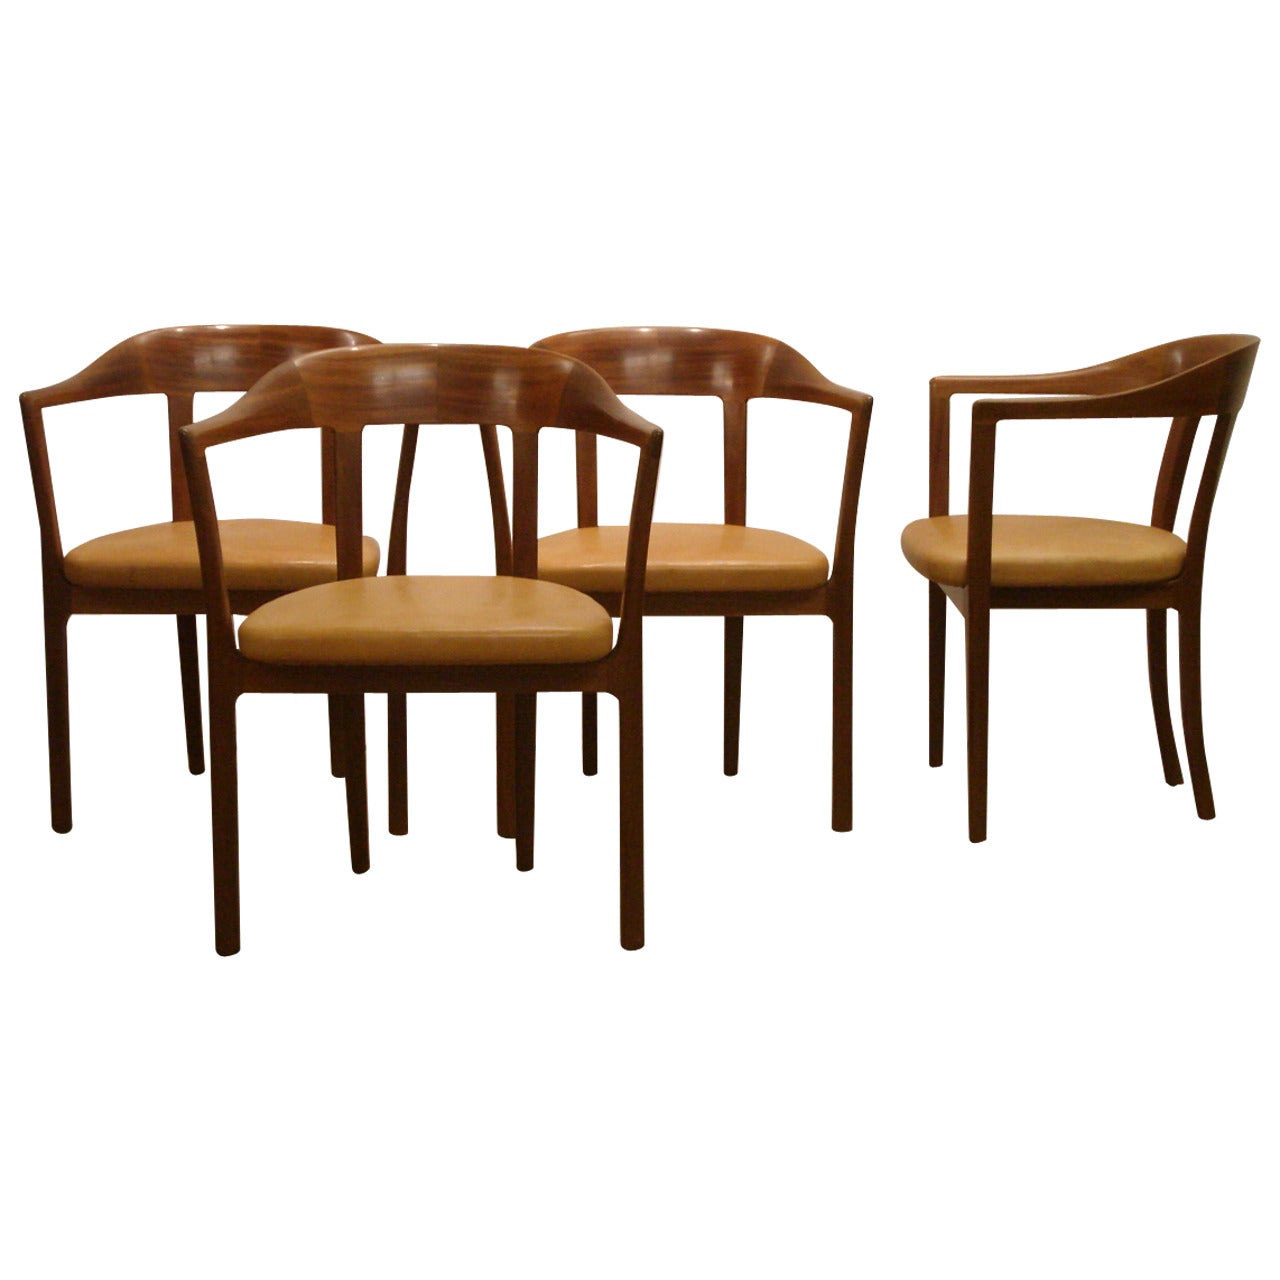 Ole Wanscher, Set of Four 1958 Armchairs in Mahogany and Original Leather Seats For Sale